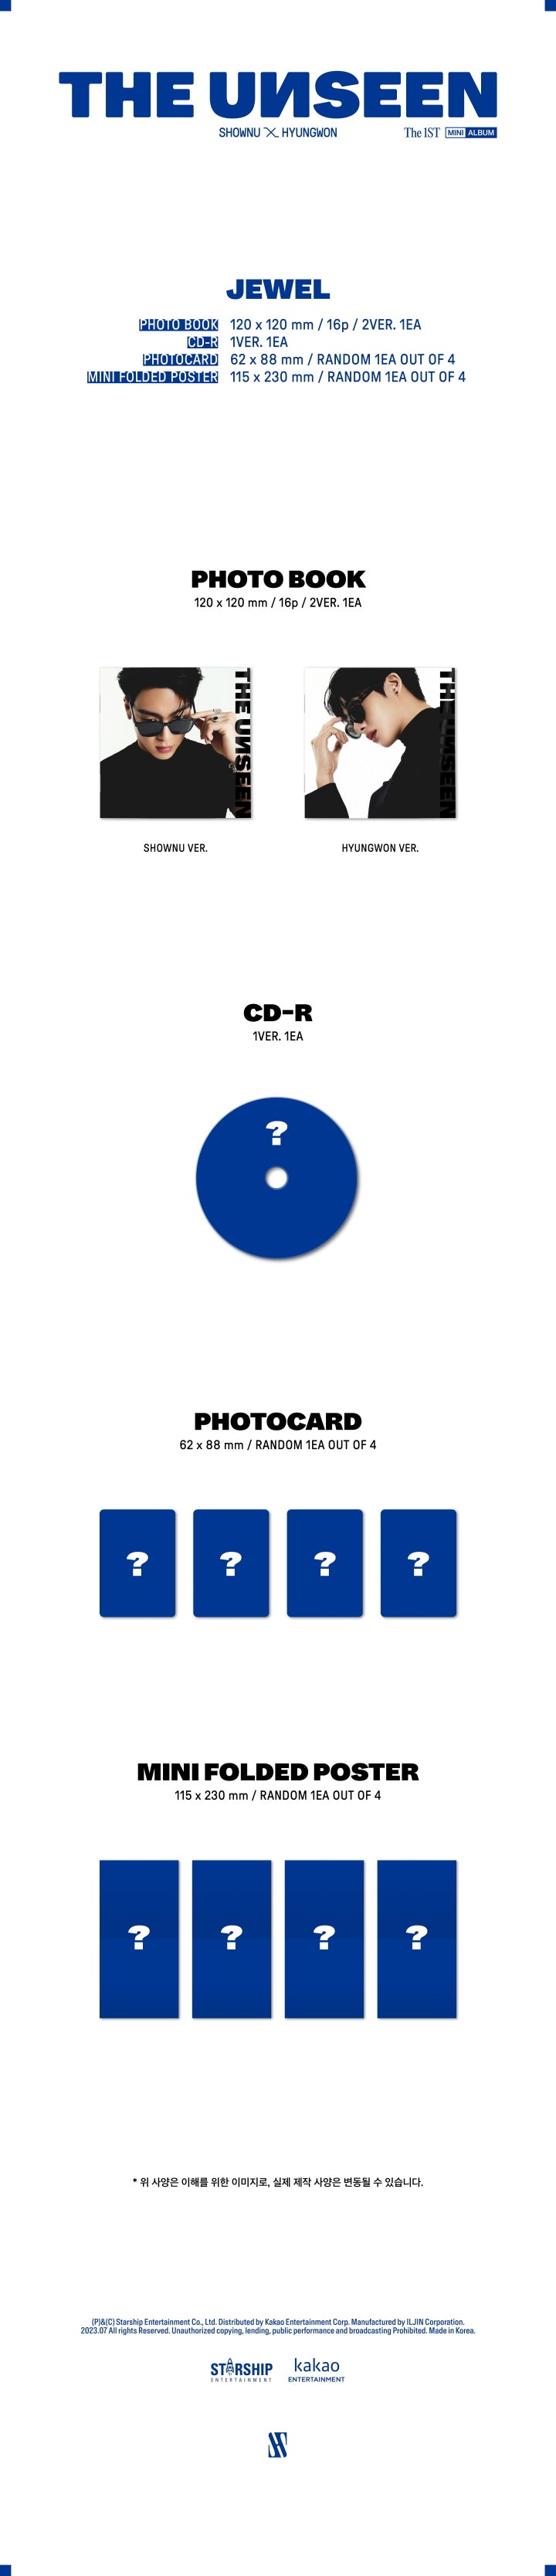 1 CD
1 Photo Book (16 pages)
1 Photo Card (random out of 4 types)
1 Mini Folded Poster (random out of 4 types)